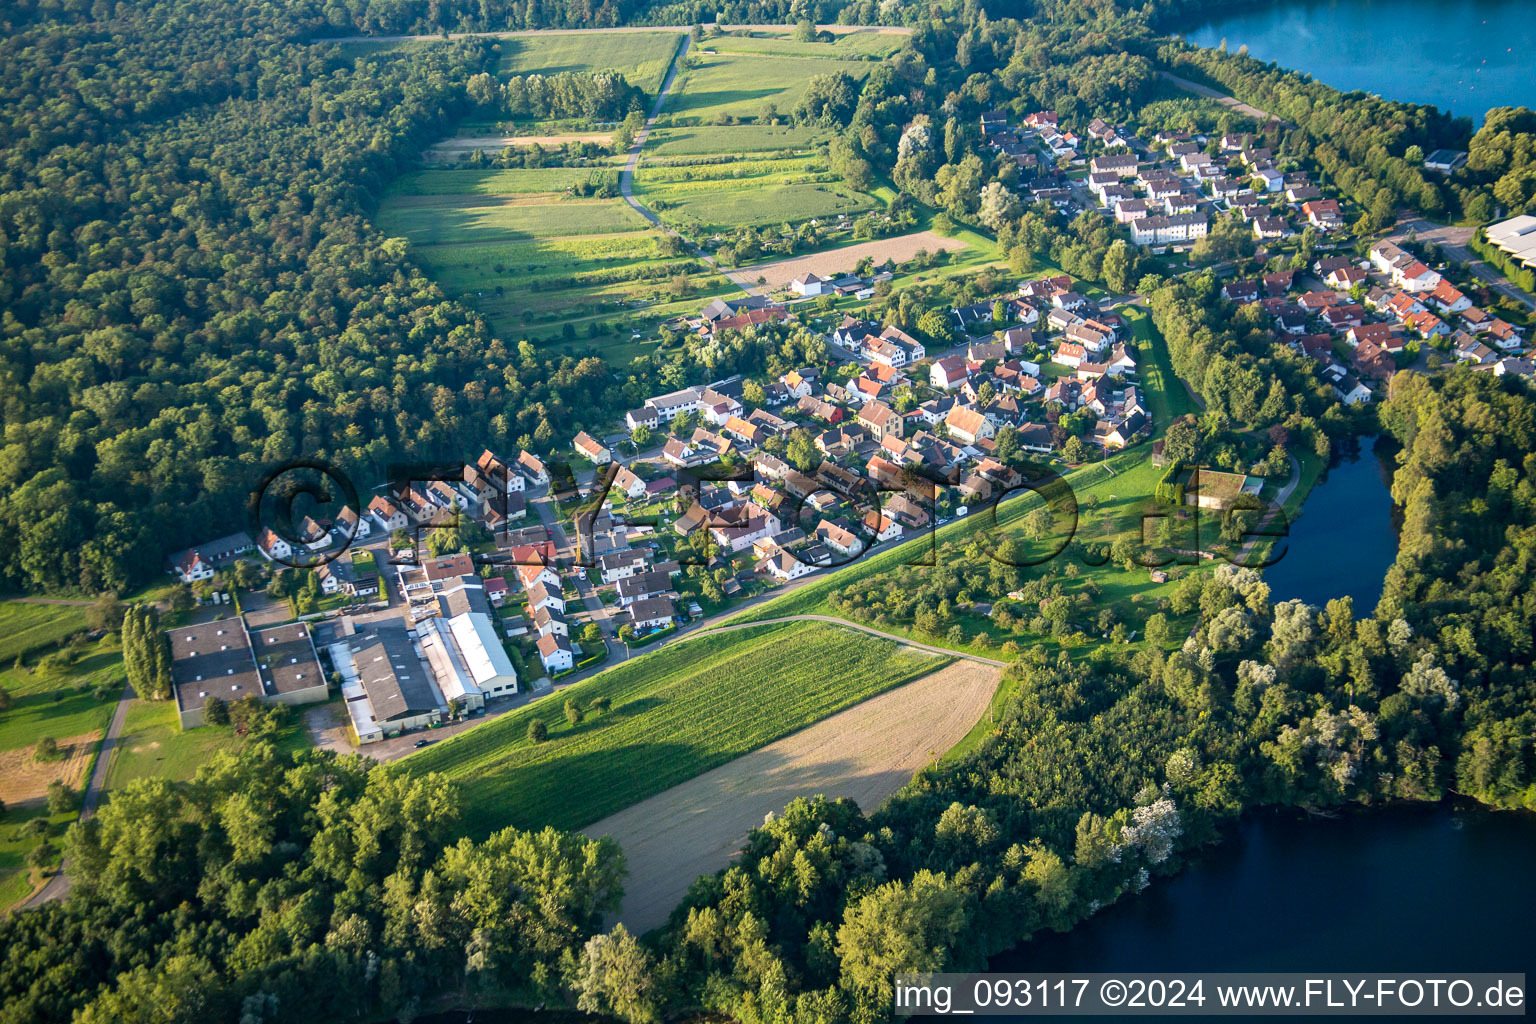 Village on the lake bank areas of lake for gravel mining near the river Rhine in the district Grauelsbaum in Lichtenau in the state Baden-Wurttemberg, Germany